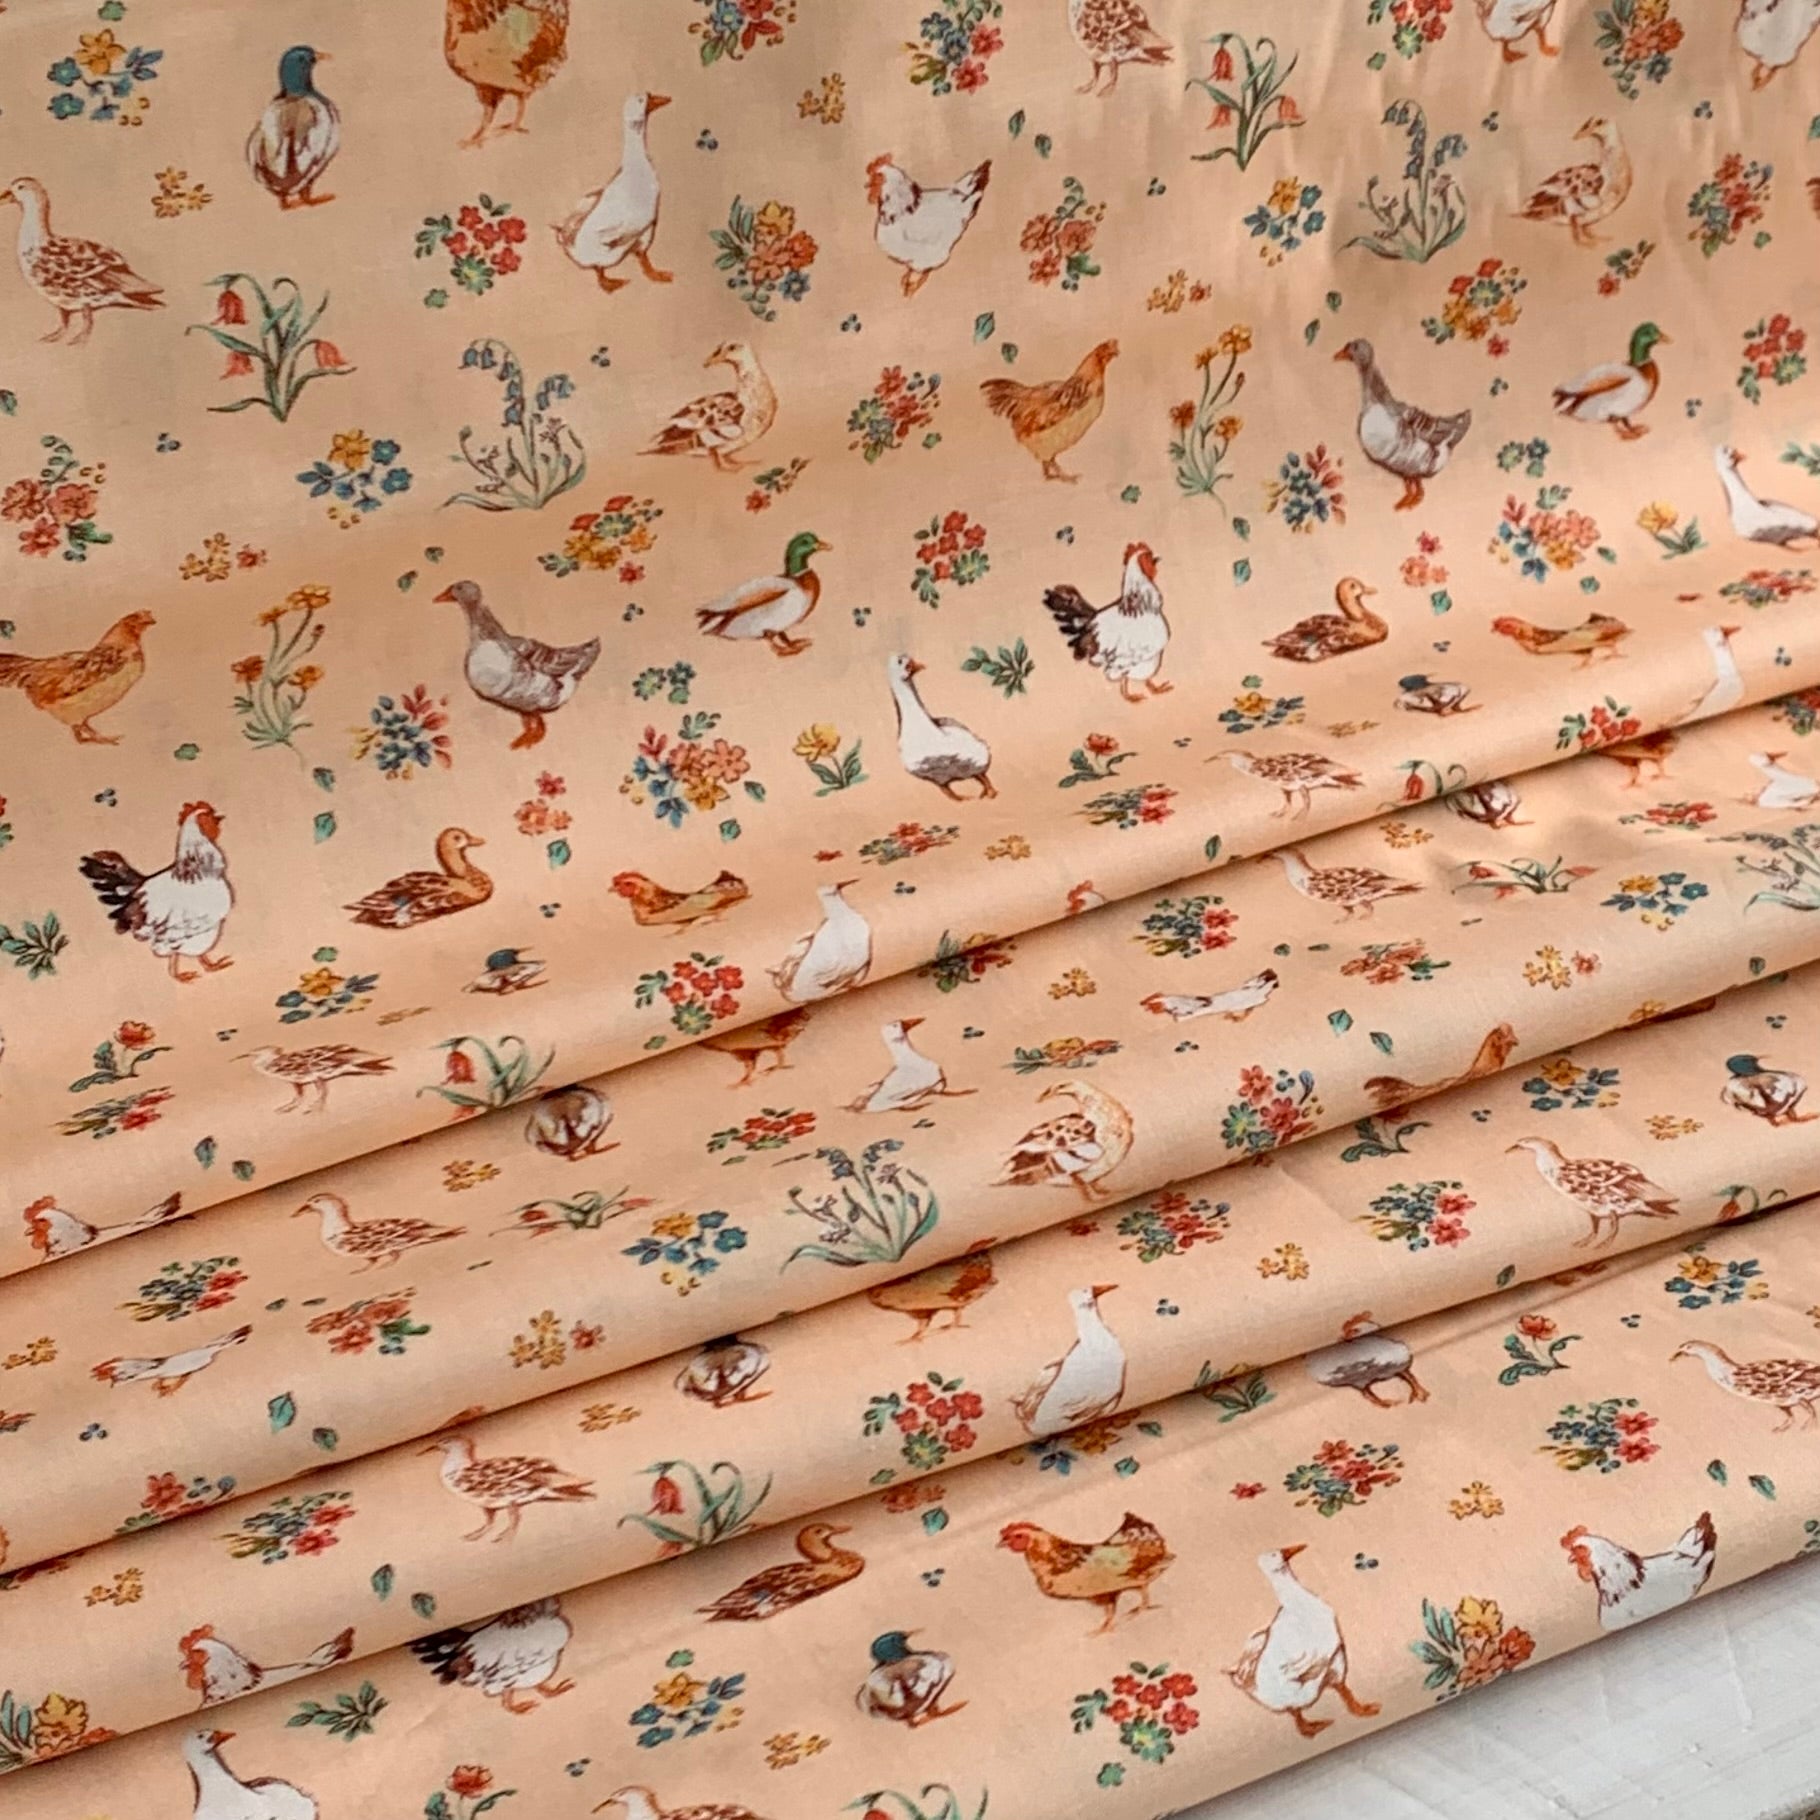 Farm Fowl, Farm Meadow by Clare Therese Gray Windham Fabrics - Peach 52795-8 Cotton Fabric